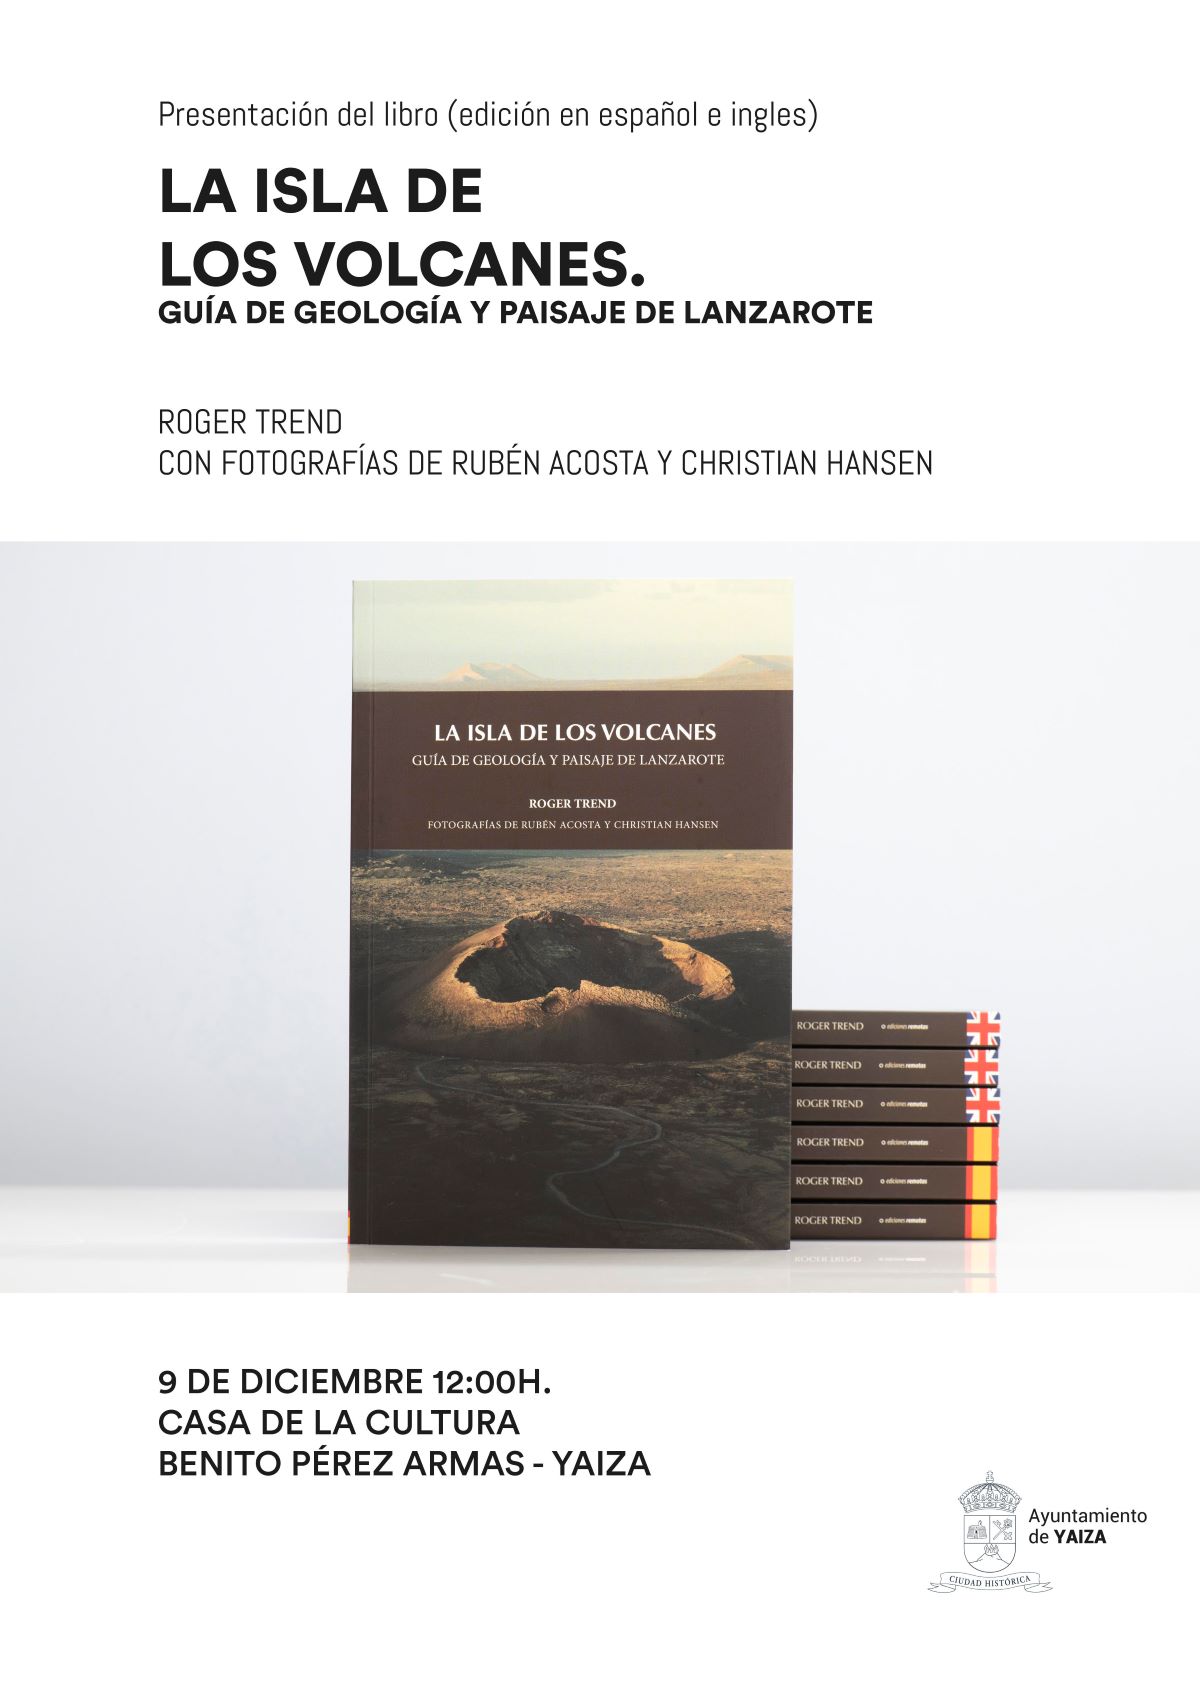 Yaiza celebrates the long weekend with a new meeting of science and literature on Saturday, December 9 at the House of Culture